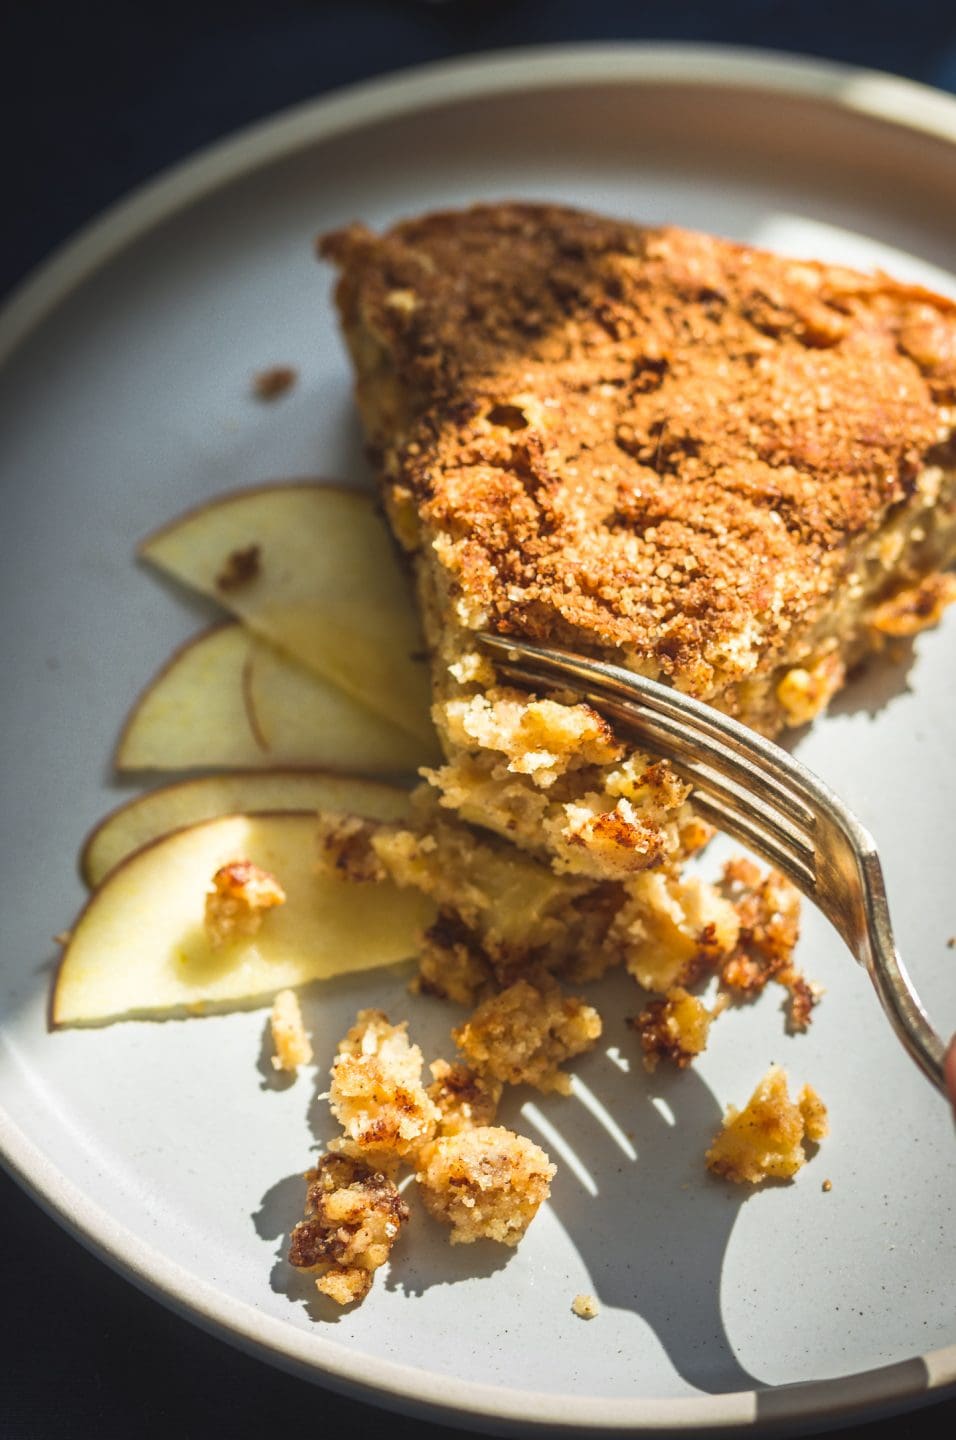 A fork slicing a bite out of a piece of cinnamon apple cake on a plate.